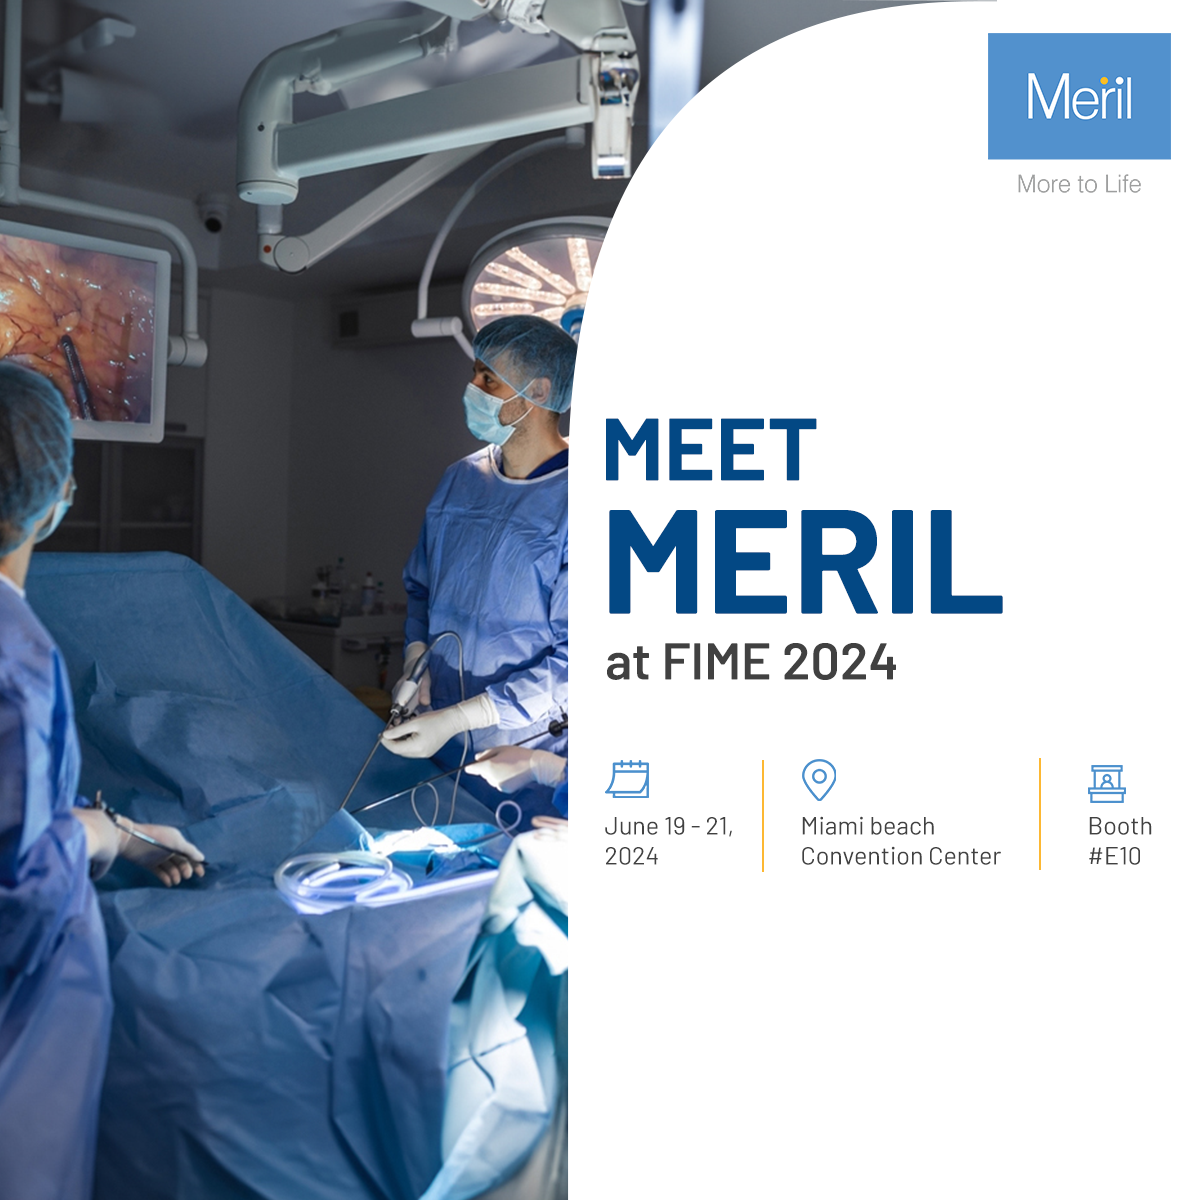  Join Meril at Florida International Medical Expo (FIME) 2024 - Save the dates!